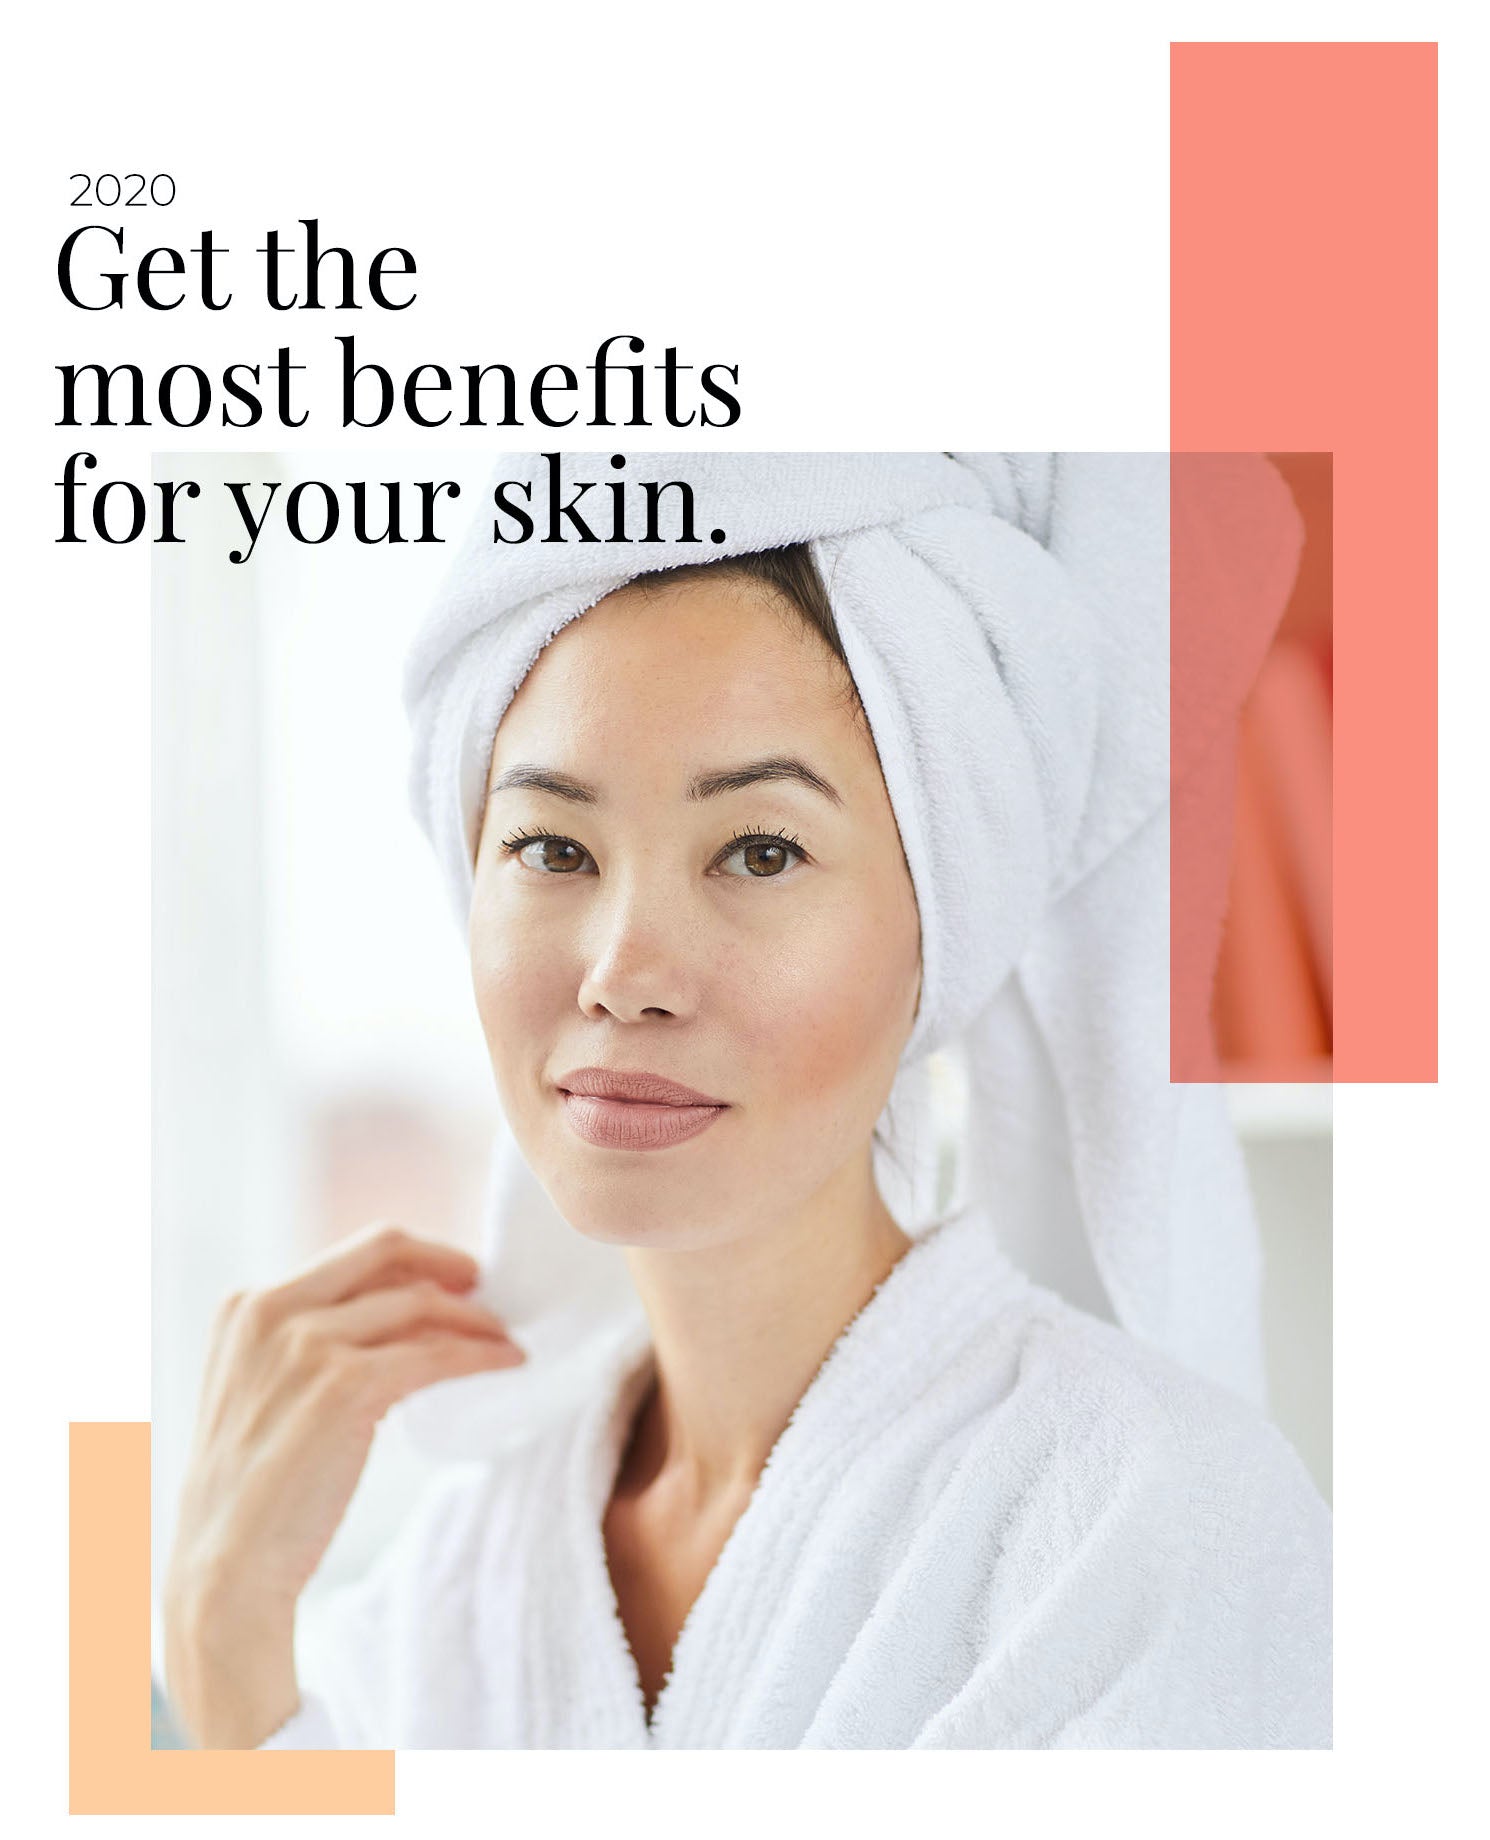 Does Your Skin Type Matter?